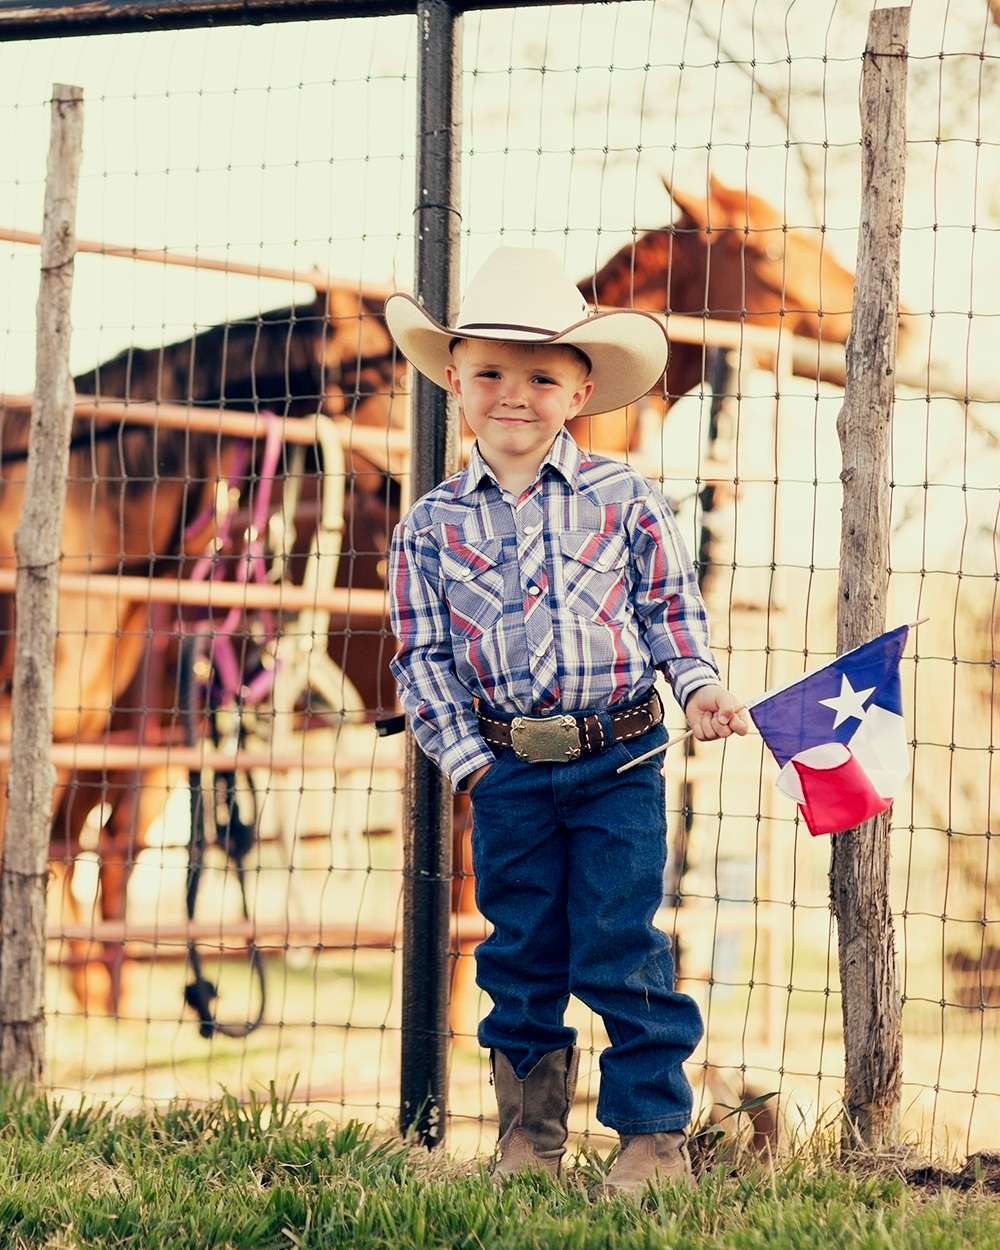 A young cowboy is proud to display the flag of Texas.